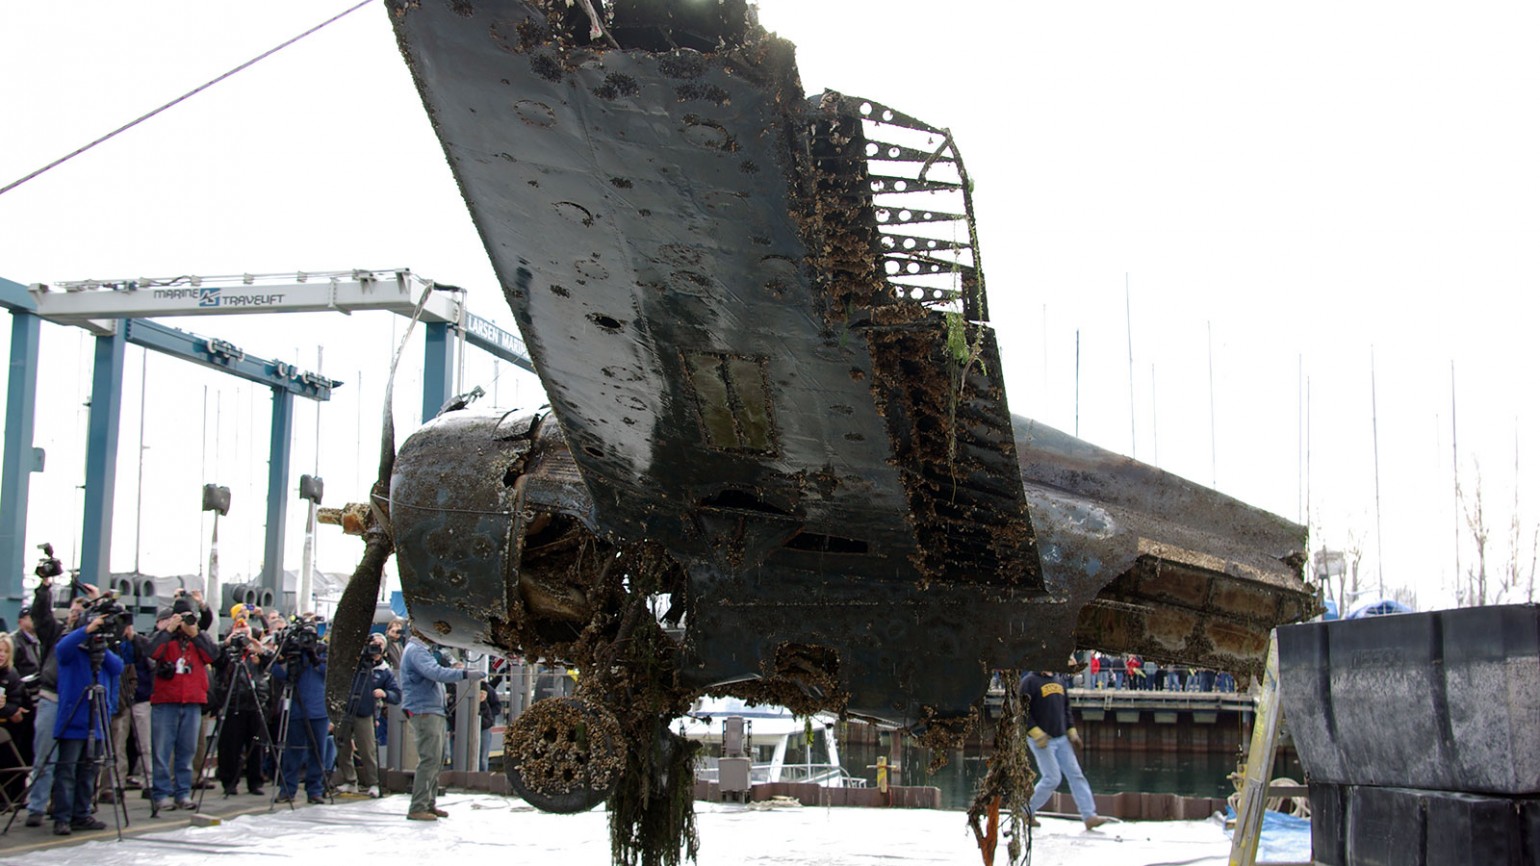 WWII aircraft recovered from the bottom of Lake Michigan. Photo courtesy of John Davies.